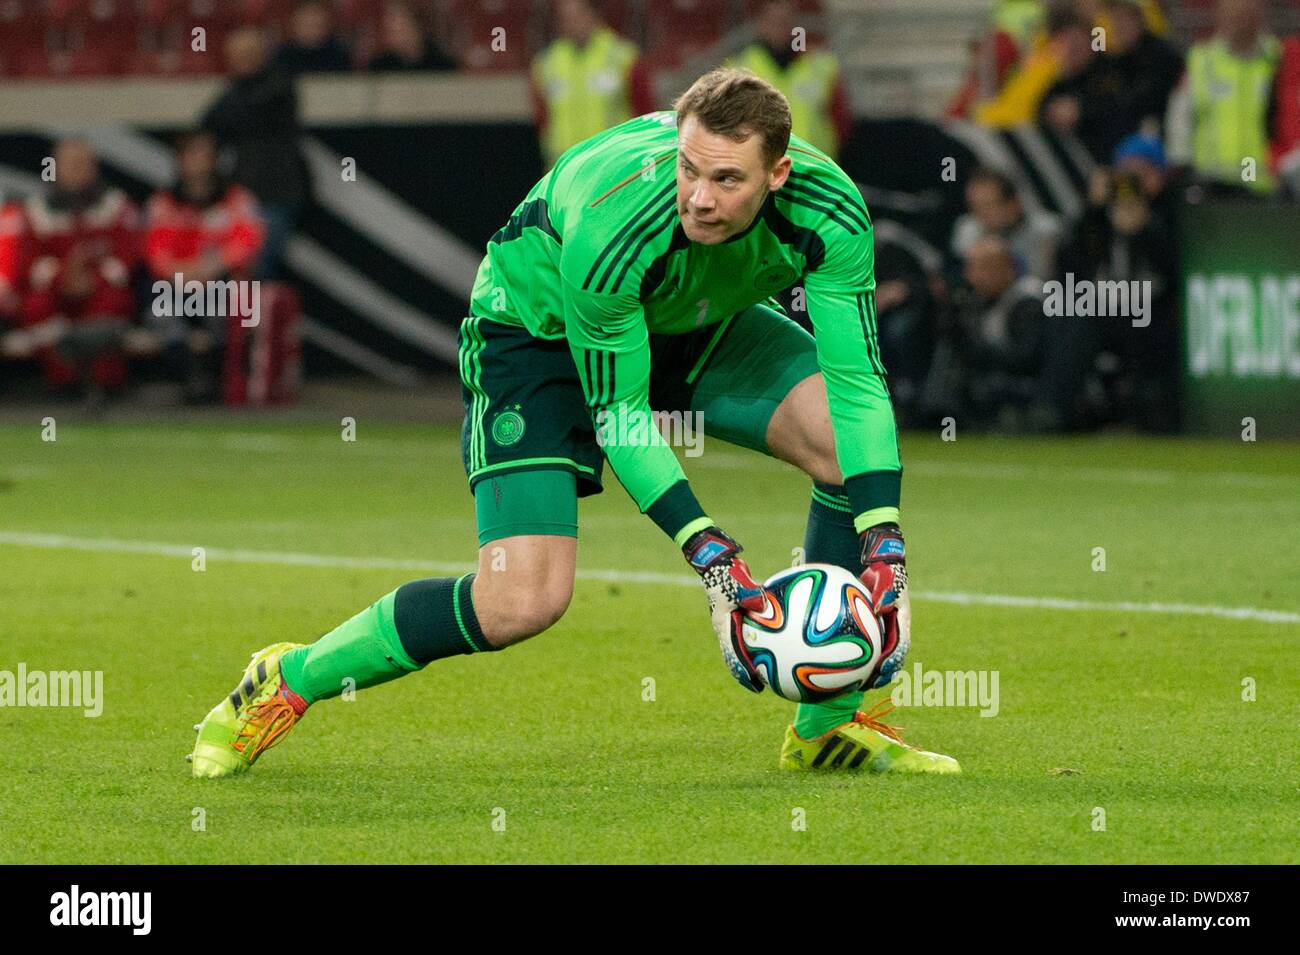 Stuttgart, Germany. 05th Mar, 2014. Germany's goalkeeper Manuel Neuer catches the ball during the international friendly match between Germany and Chile at Mercedes-Benz-Arena in Stuttgart, Germany, 05 March 2014. Photo: Sebastian Kahnert/dpa/Alamy Live News Stock Photo